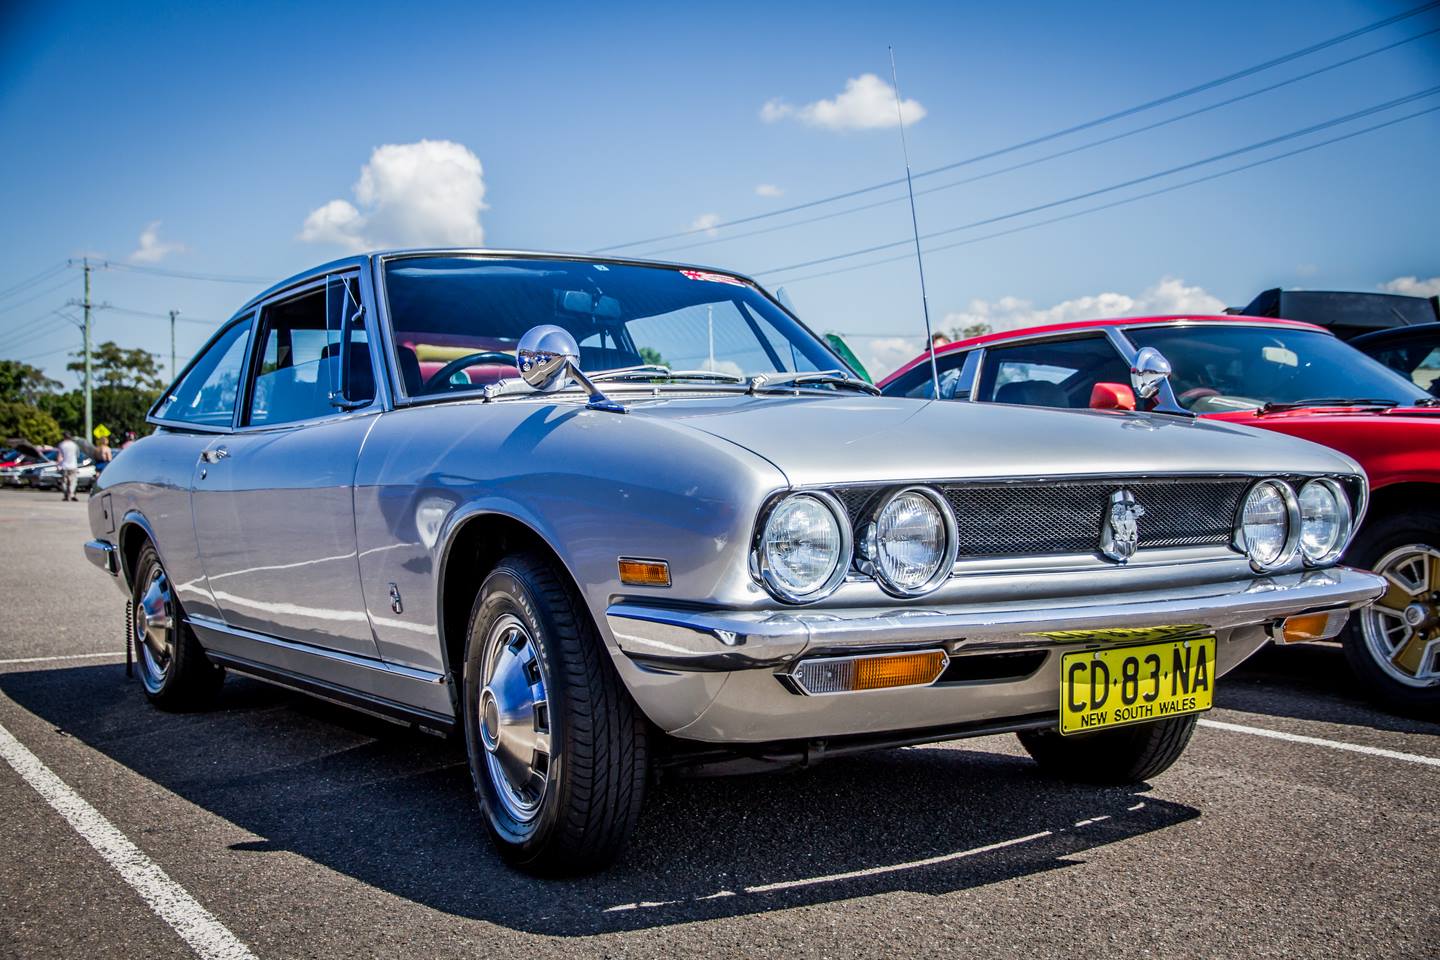 An immaculate Isuzu 117 coupe we imported to Australia that still had plastic over the door trims! Owner won a show'n'shine event on its first outing.